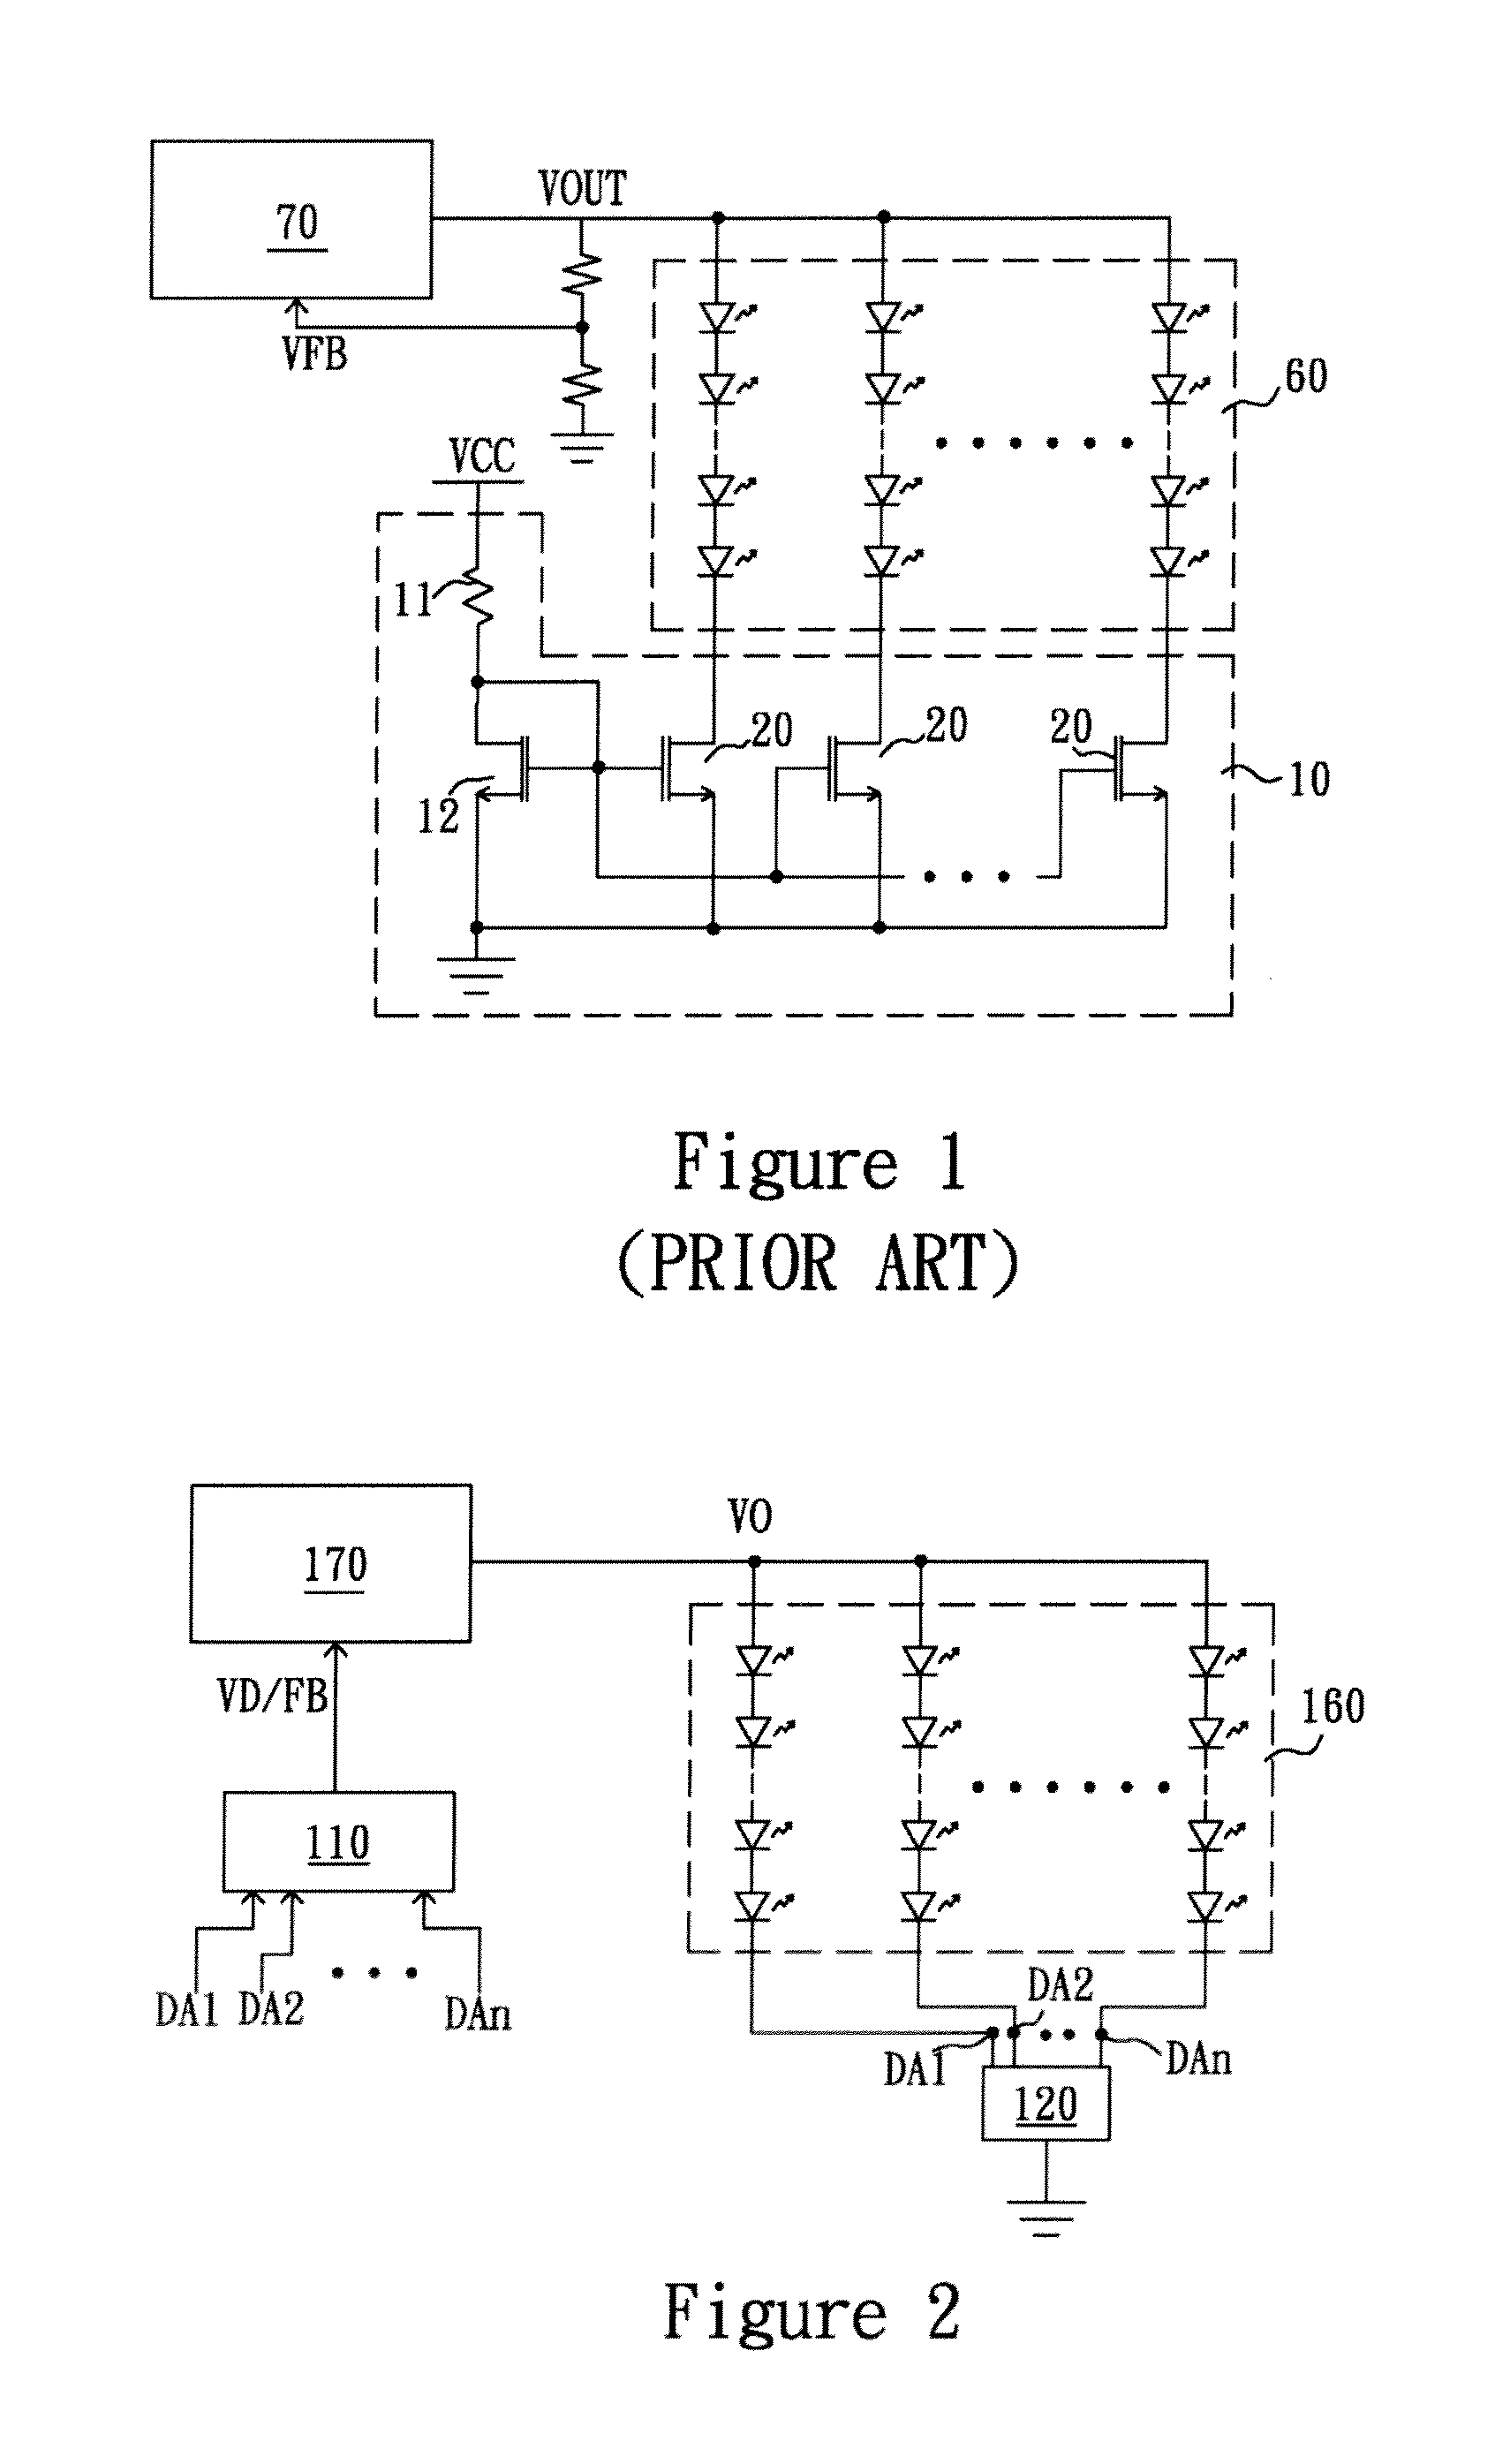 Load driving circuit and multi-load feedback circuit